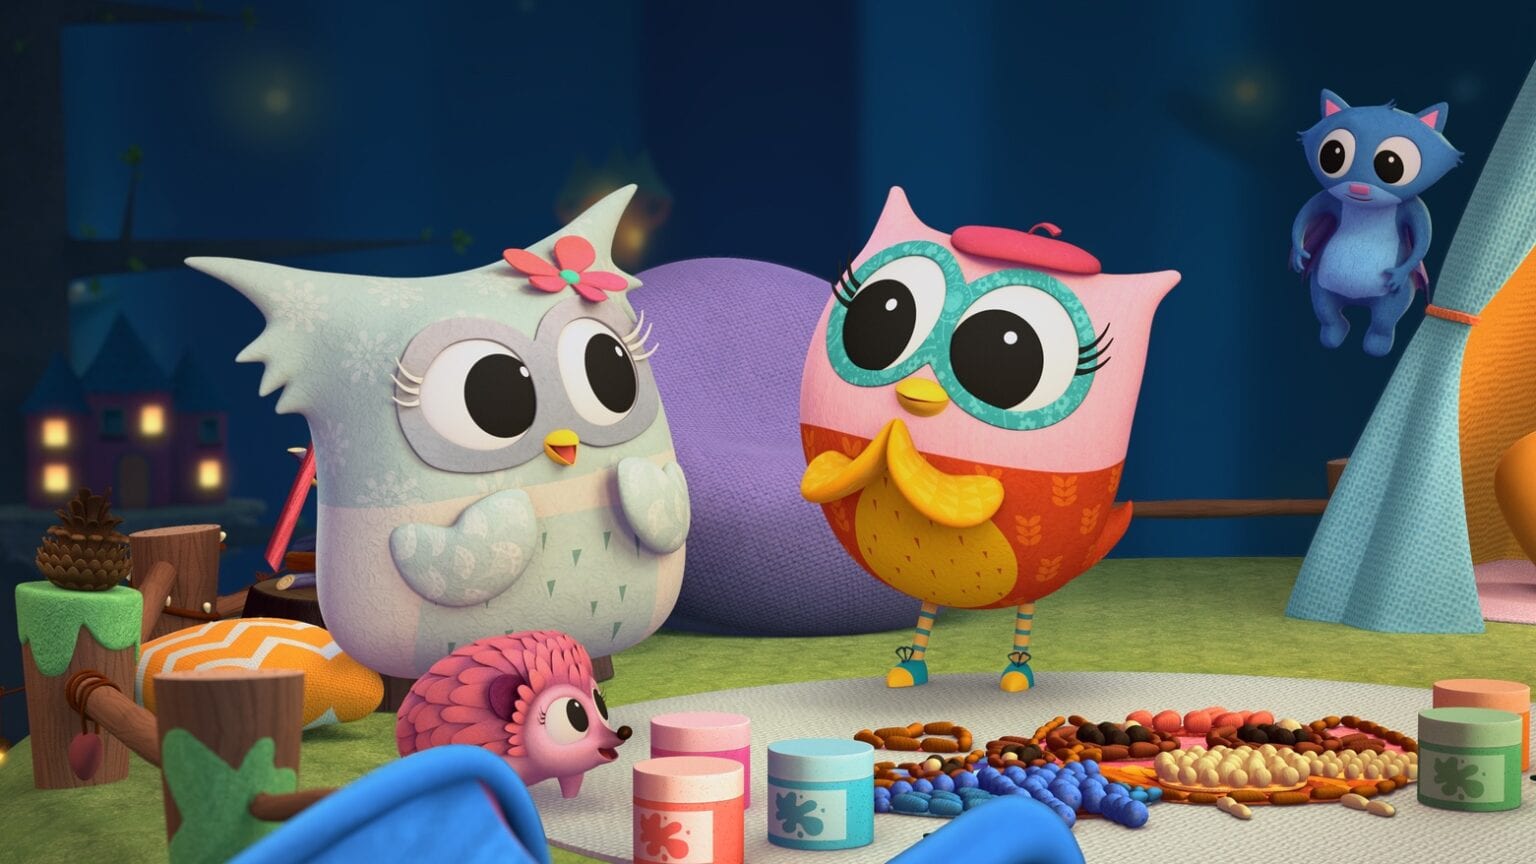 Take off with 'Eva the Owlet' on Apple TV+